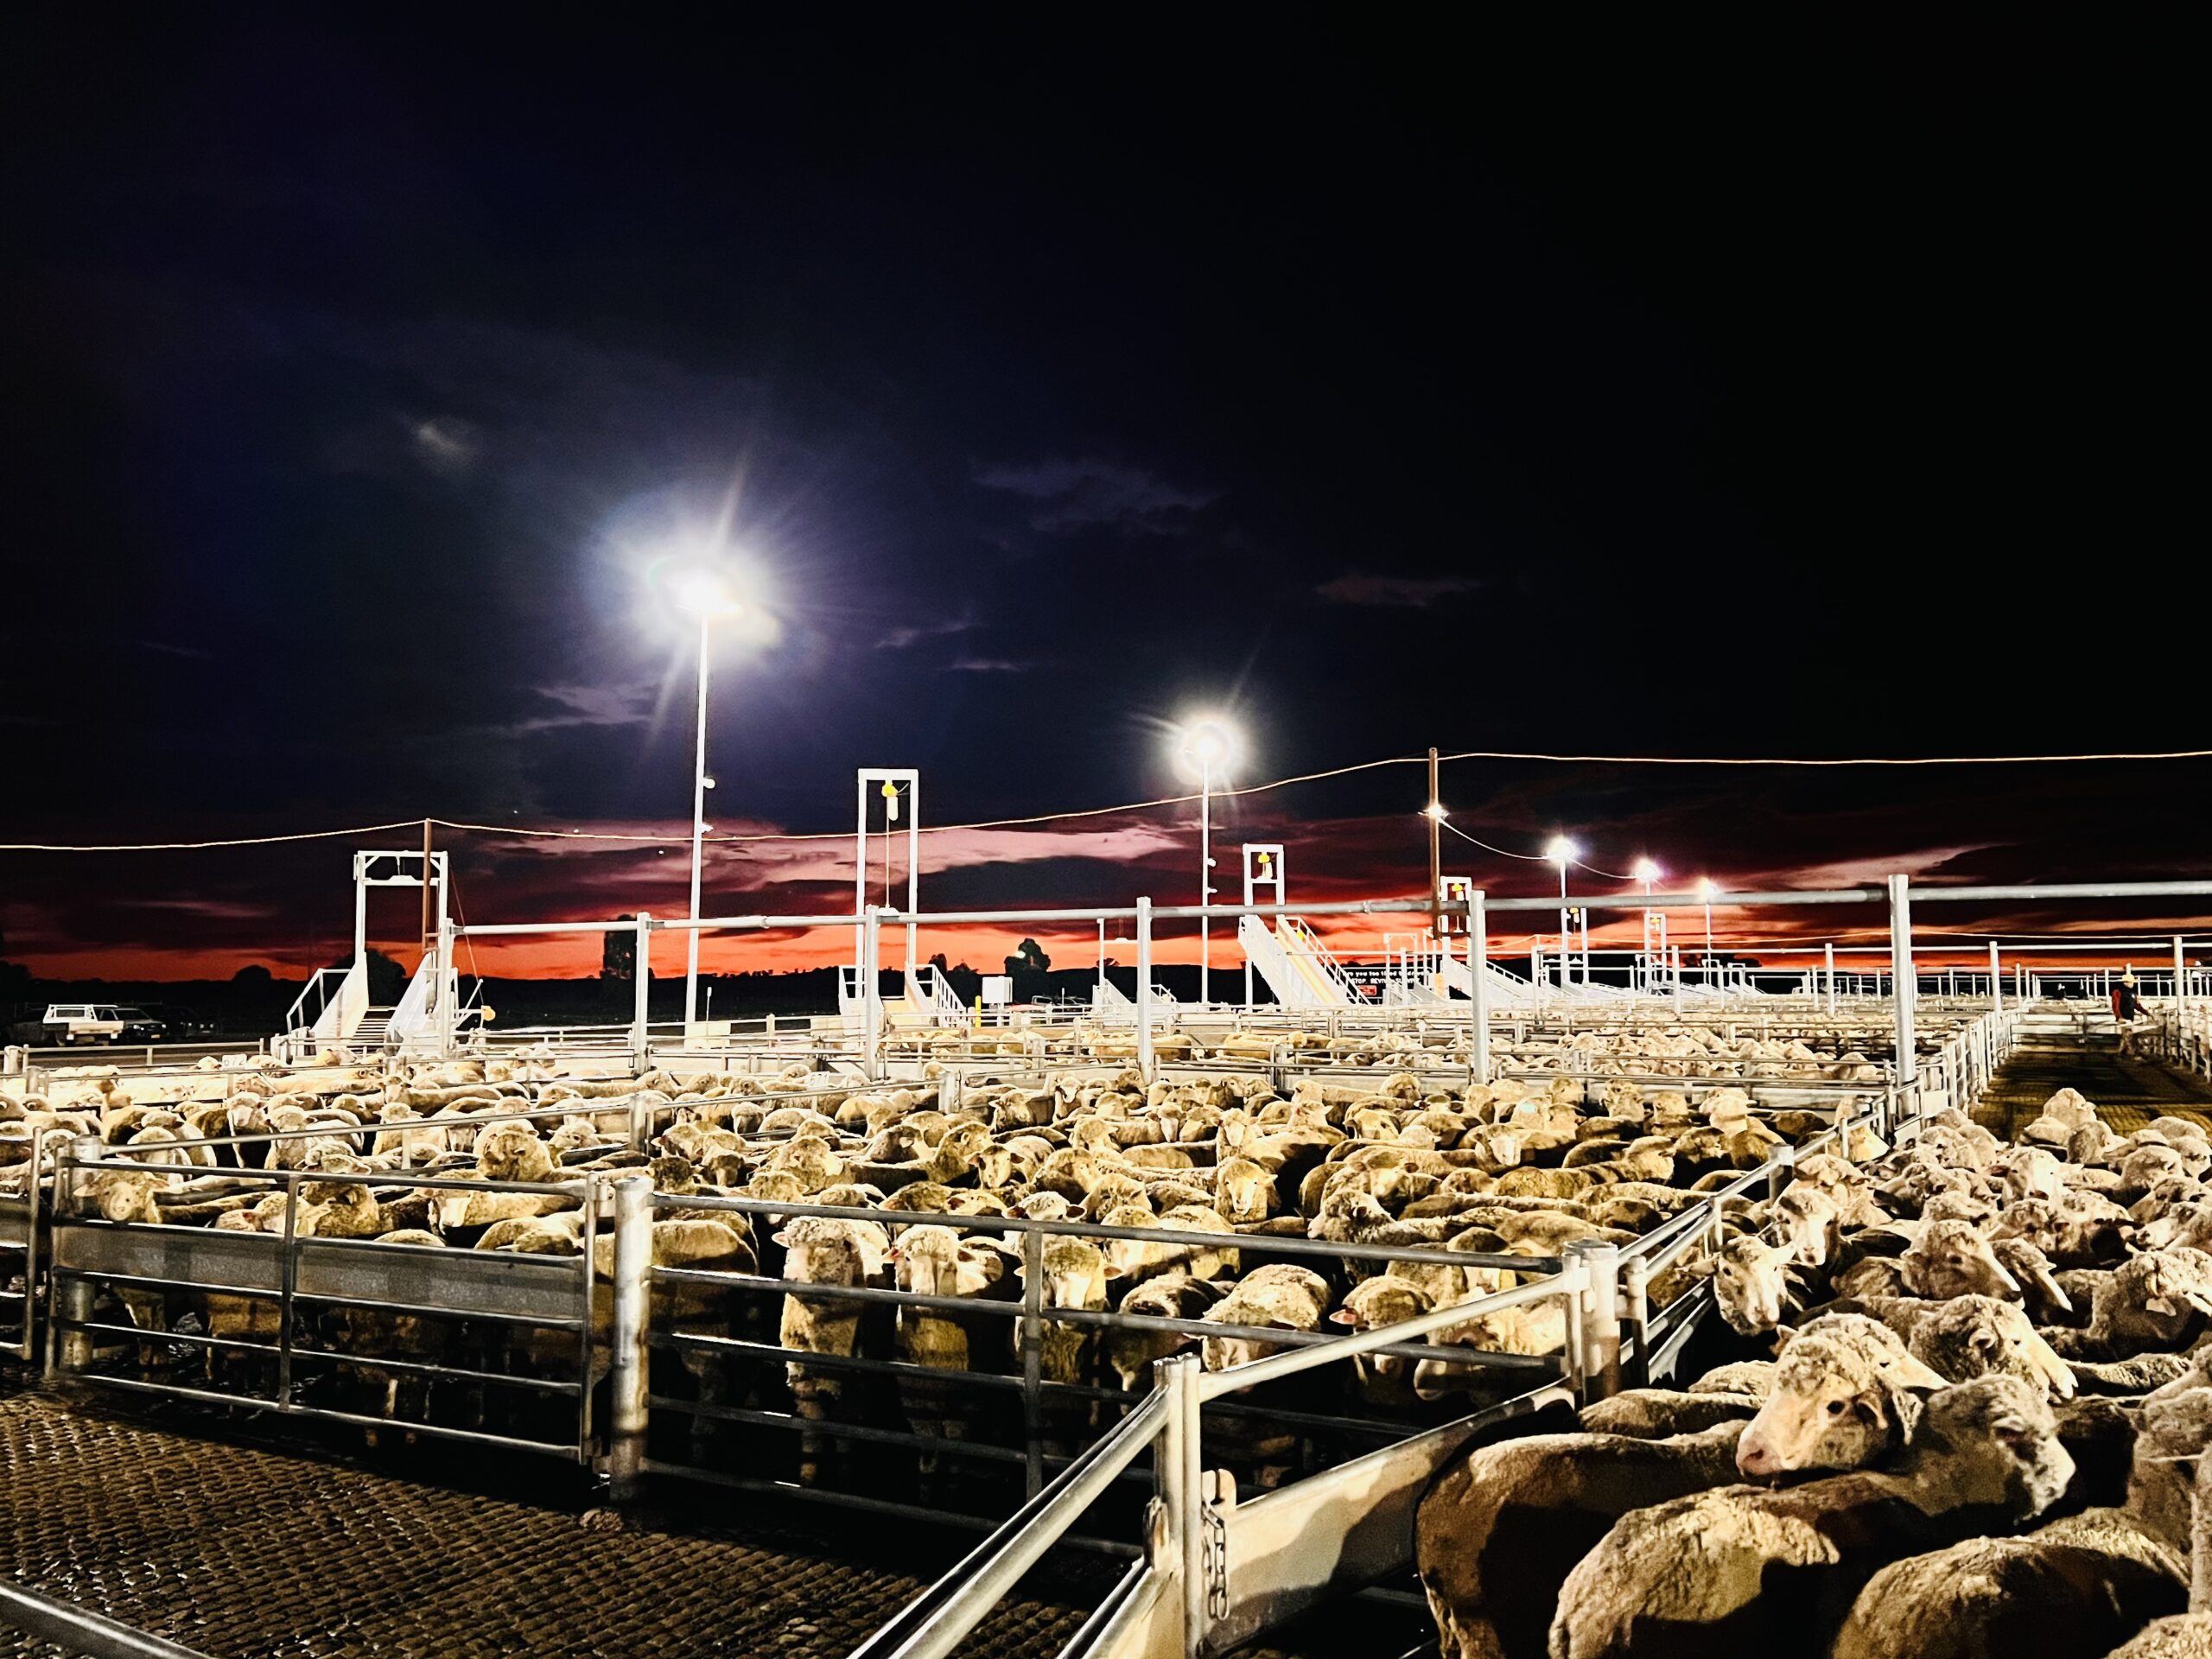 Country Education Foundation of Australia alumnus Heather Walker's winning entry, 'Early mornings at the sheep sale'.